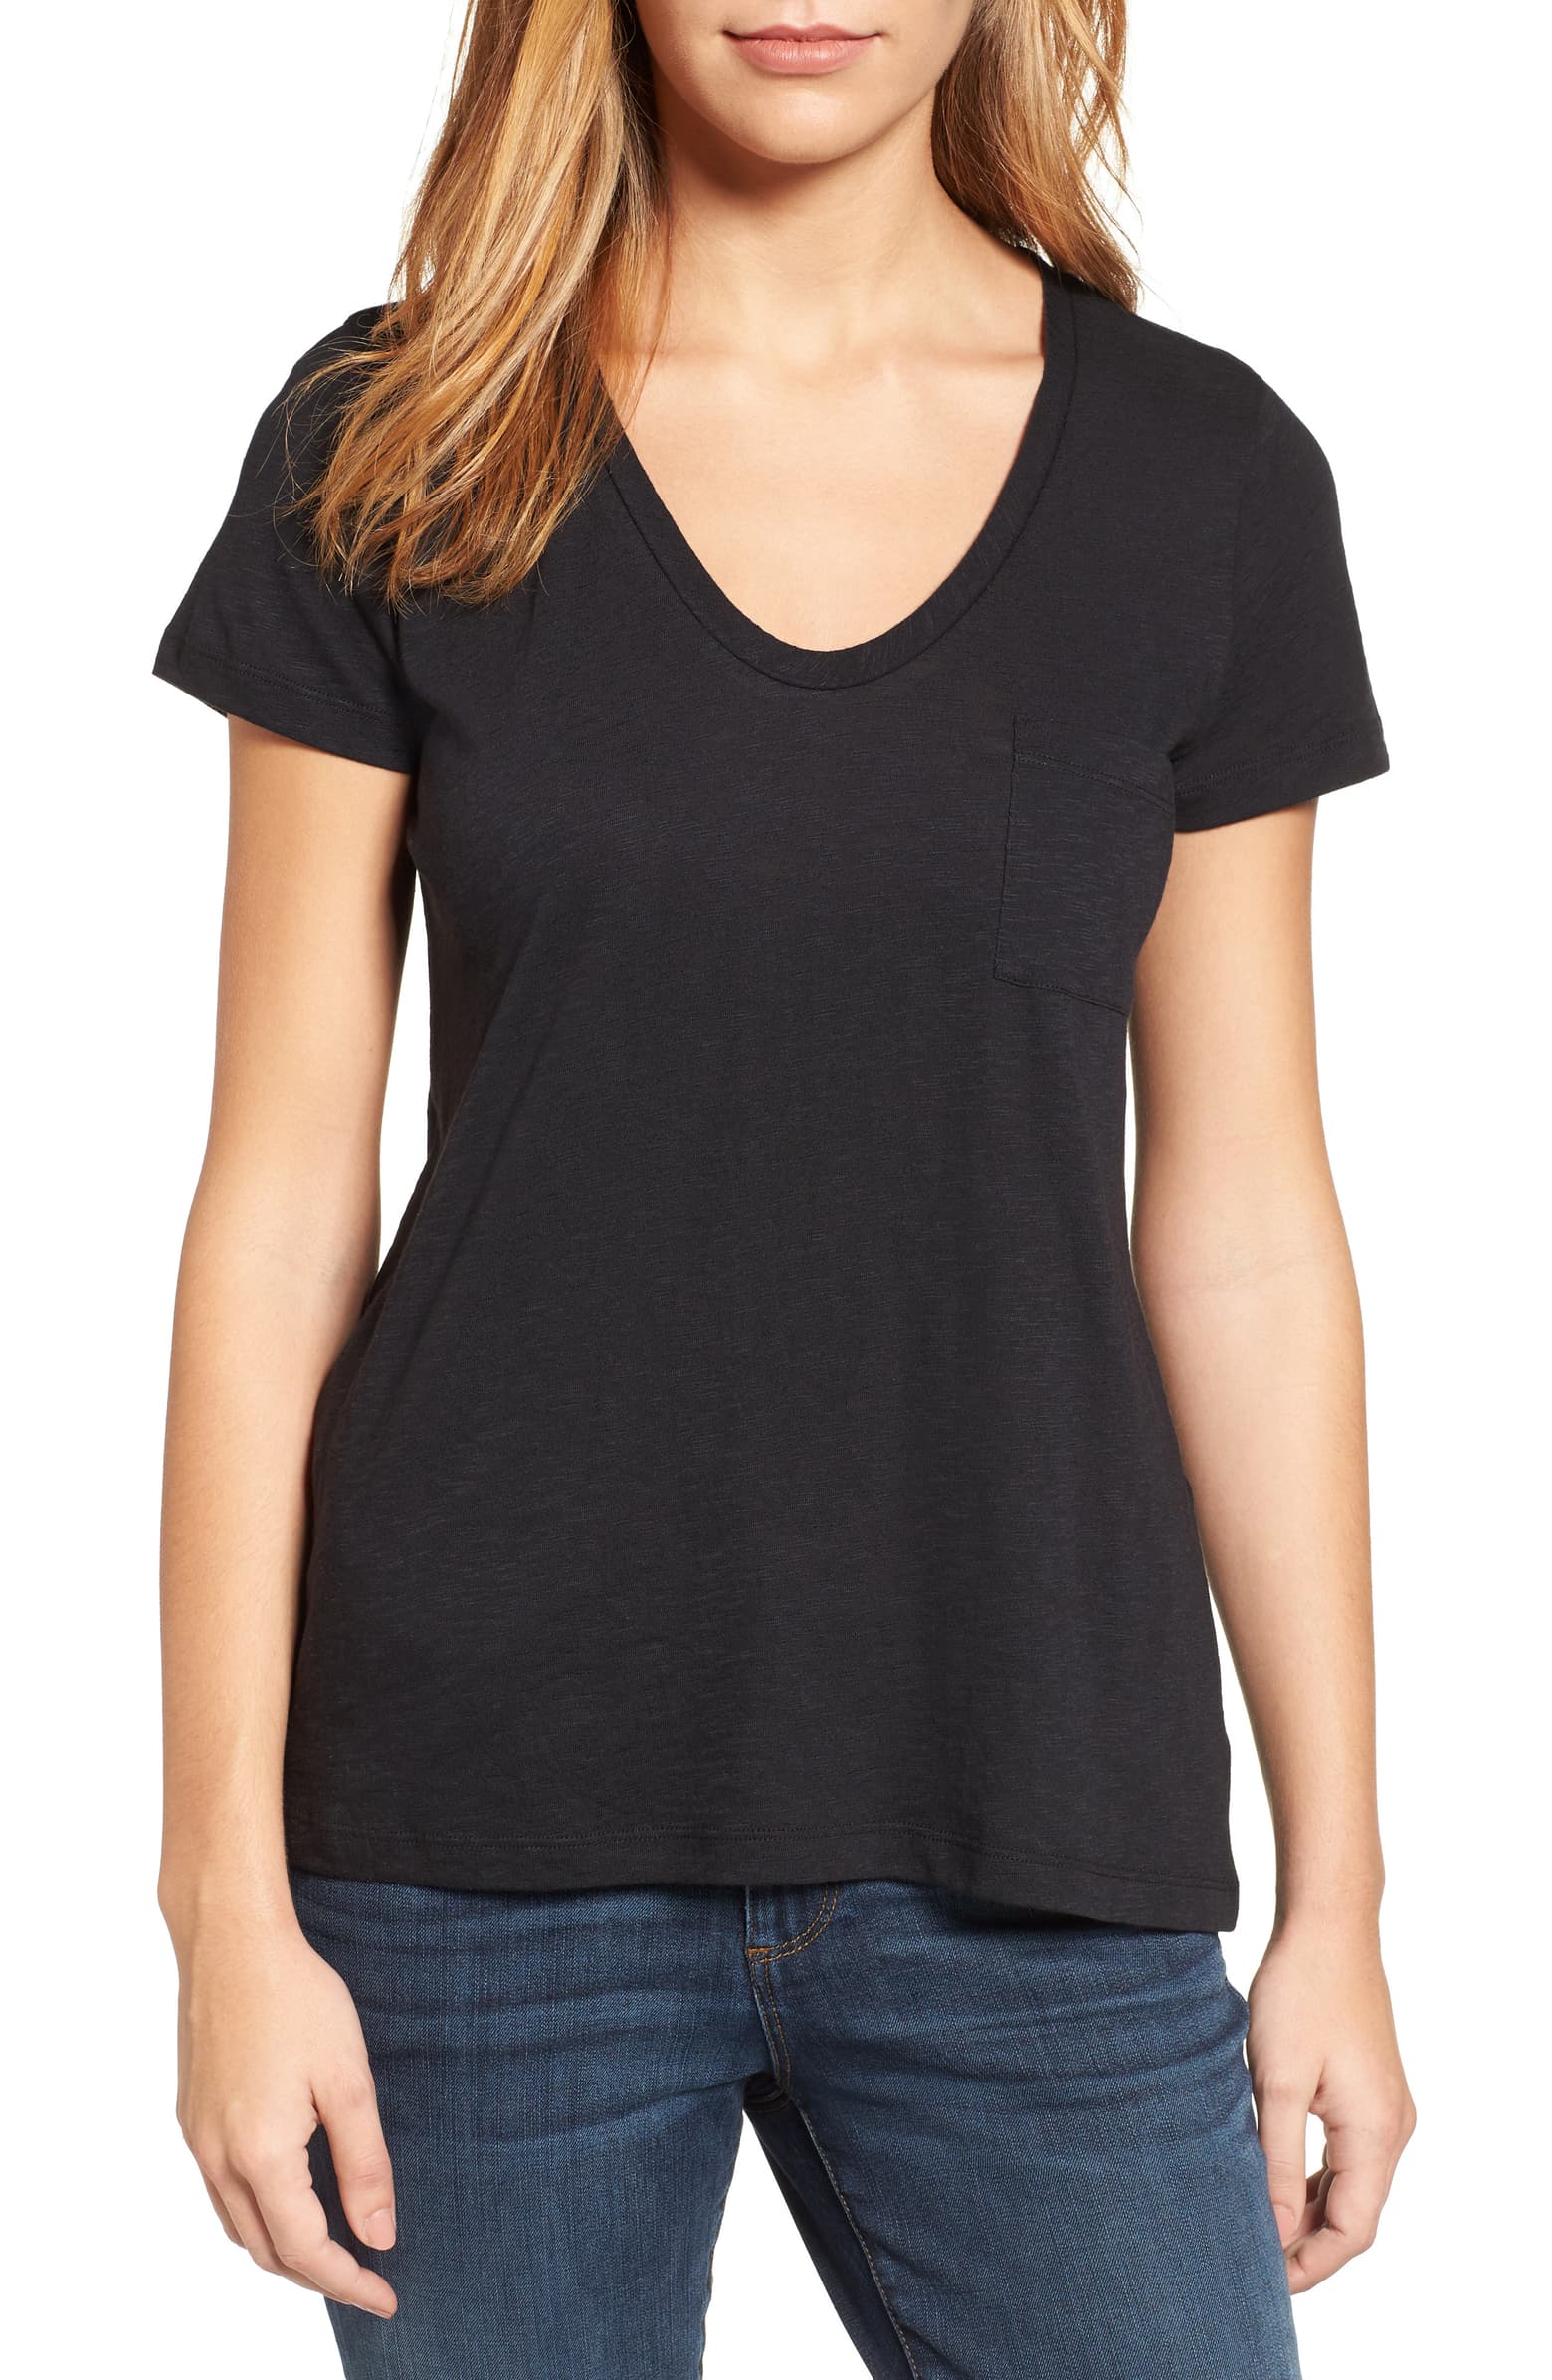 The Softest, Most Flattering Tee Is On Sale For Just $15 At Nordstrom ...